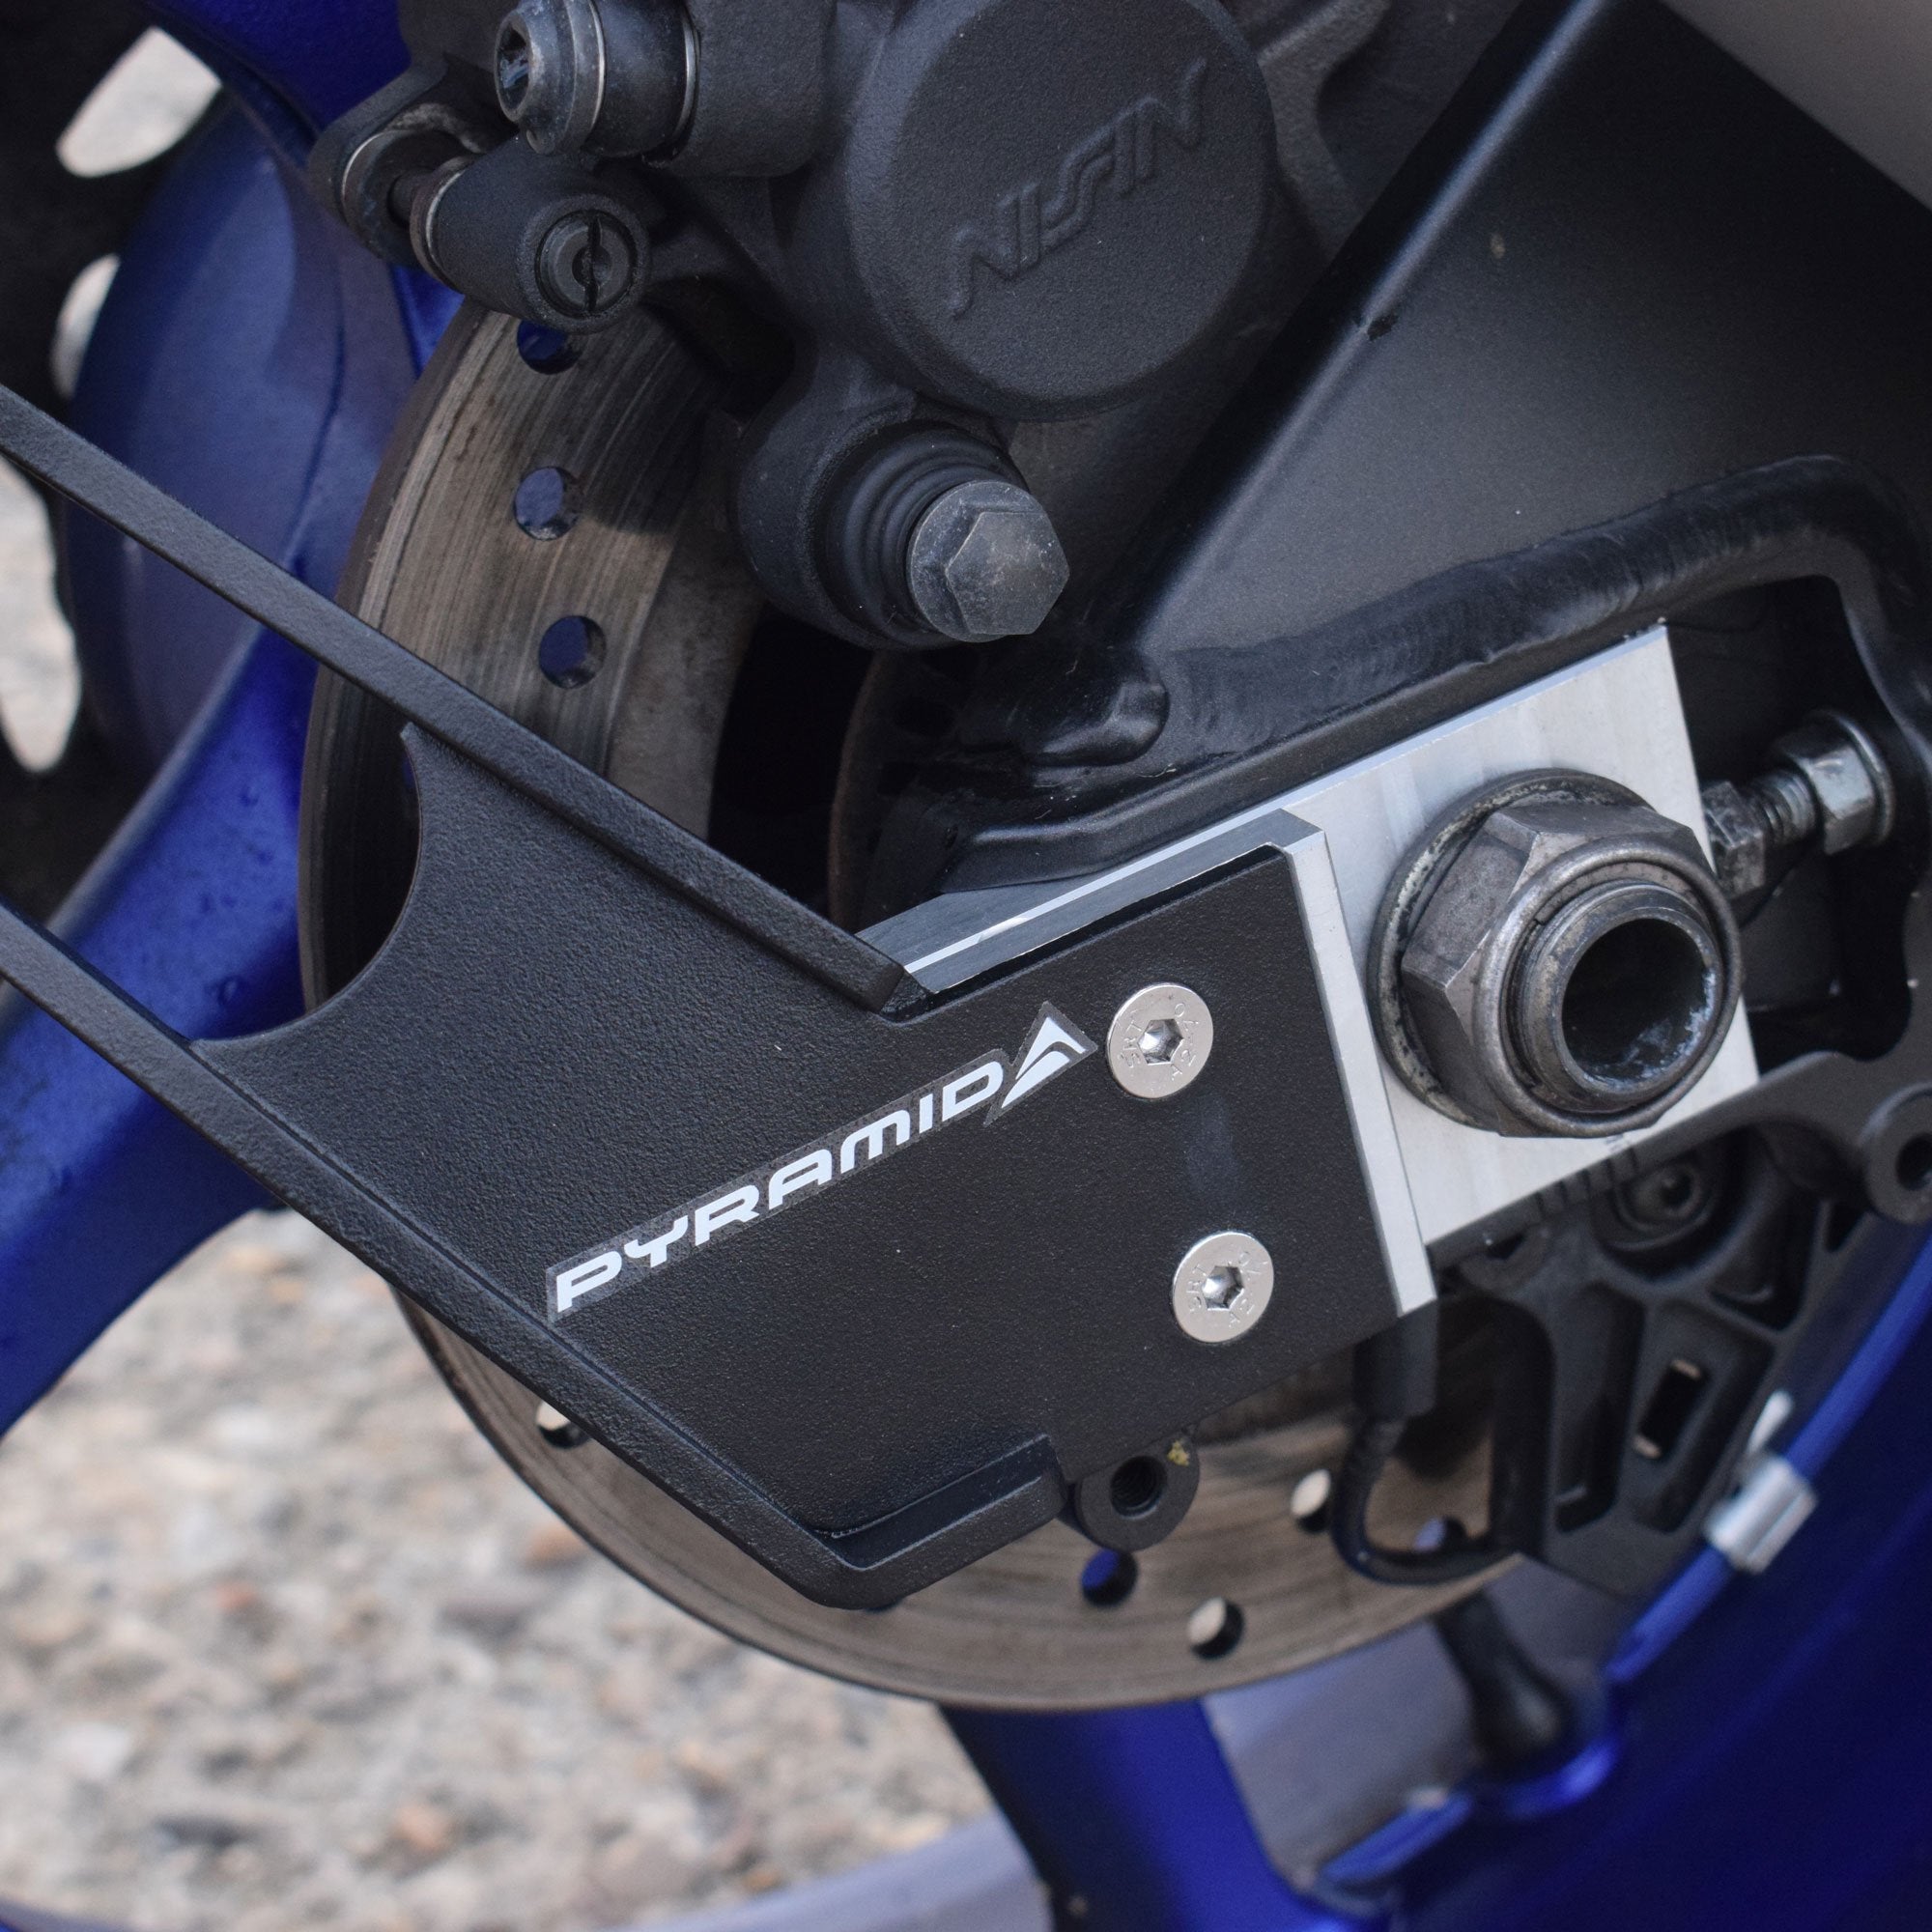 Pyramid Spray Guard | Matte Black | Yamaha MT-10 SP 2016>Current-085220M-Spray Guards-Pyramid Motorcycle Accessories